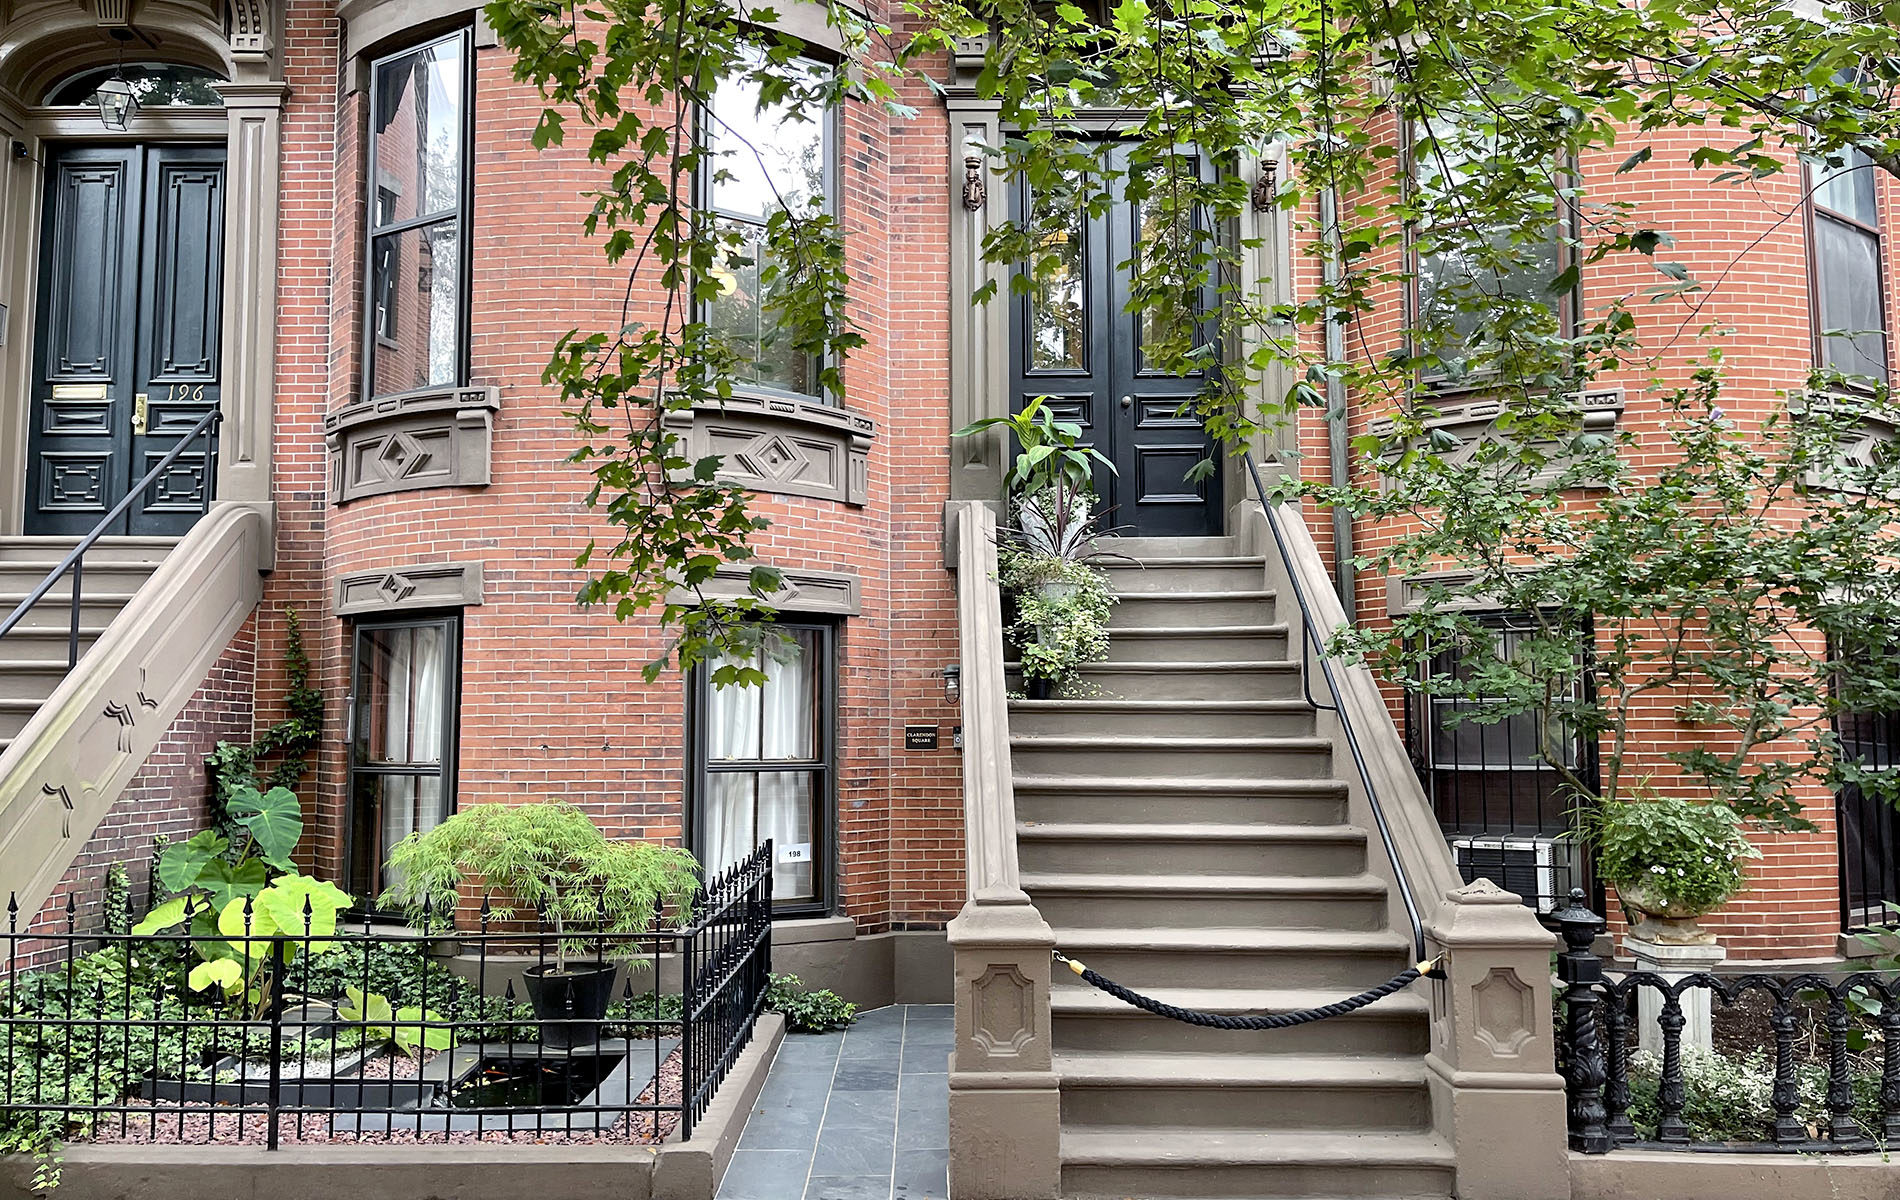 Red brick brownstone with large stone staircase leading to double black entry doors. Tree branches from above and many plants in gardens.